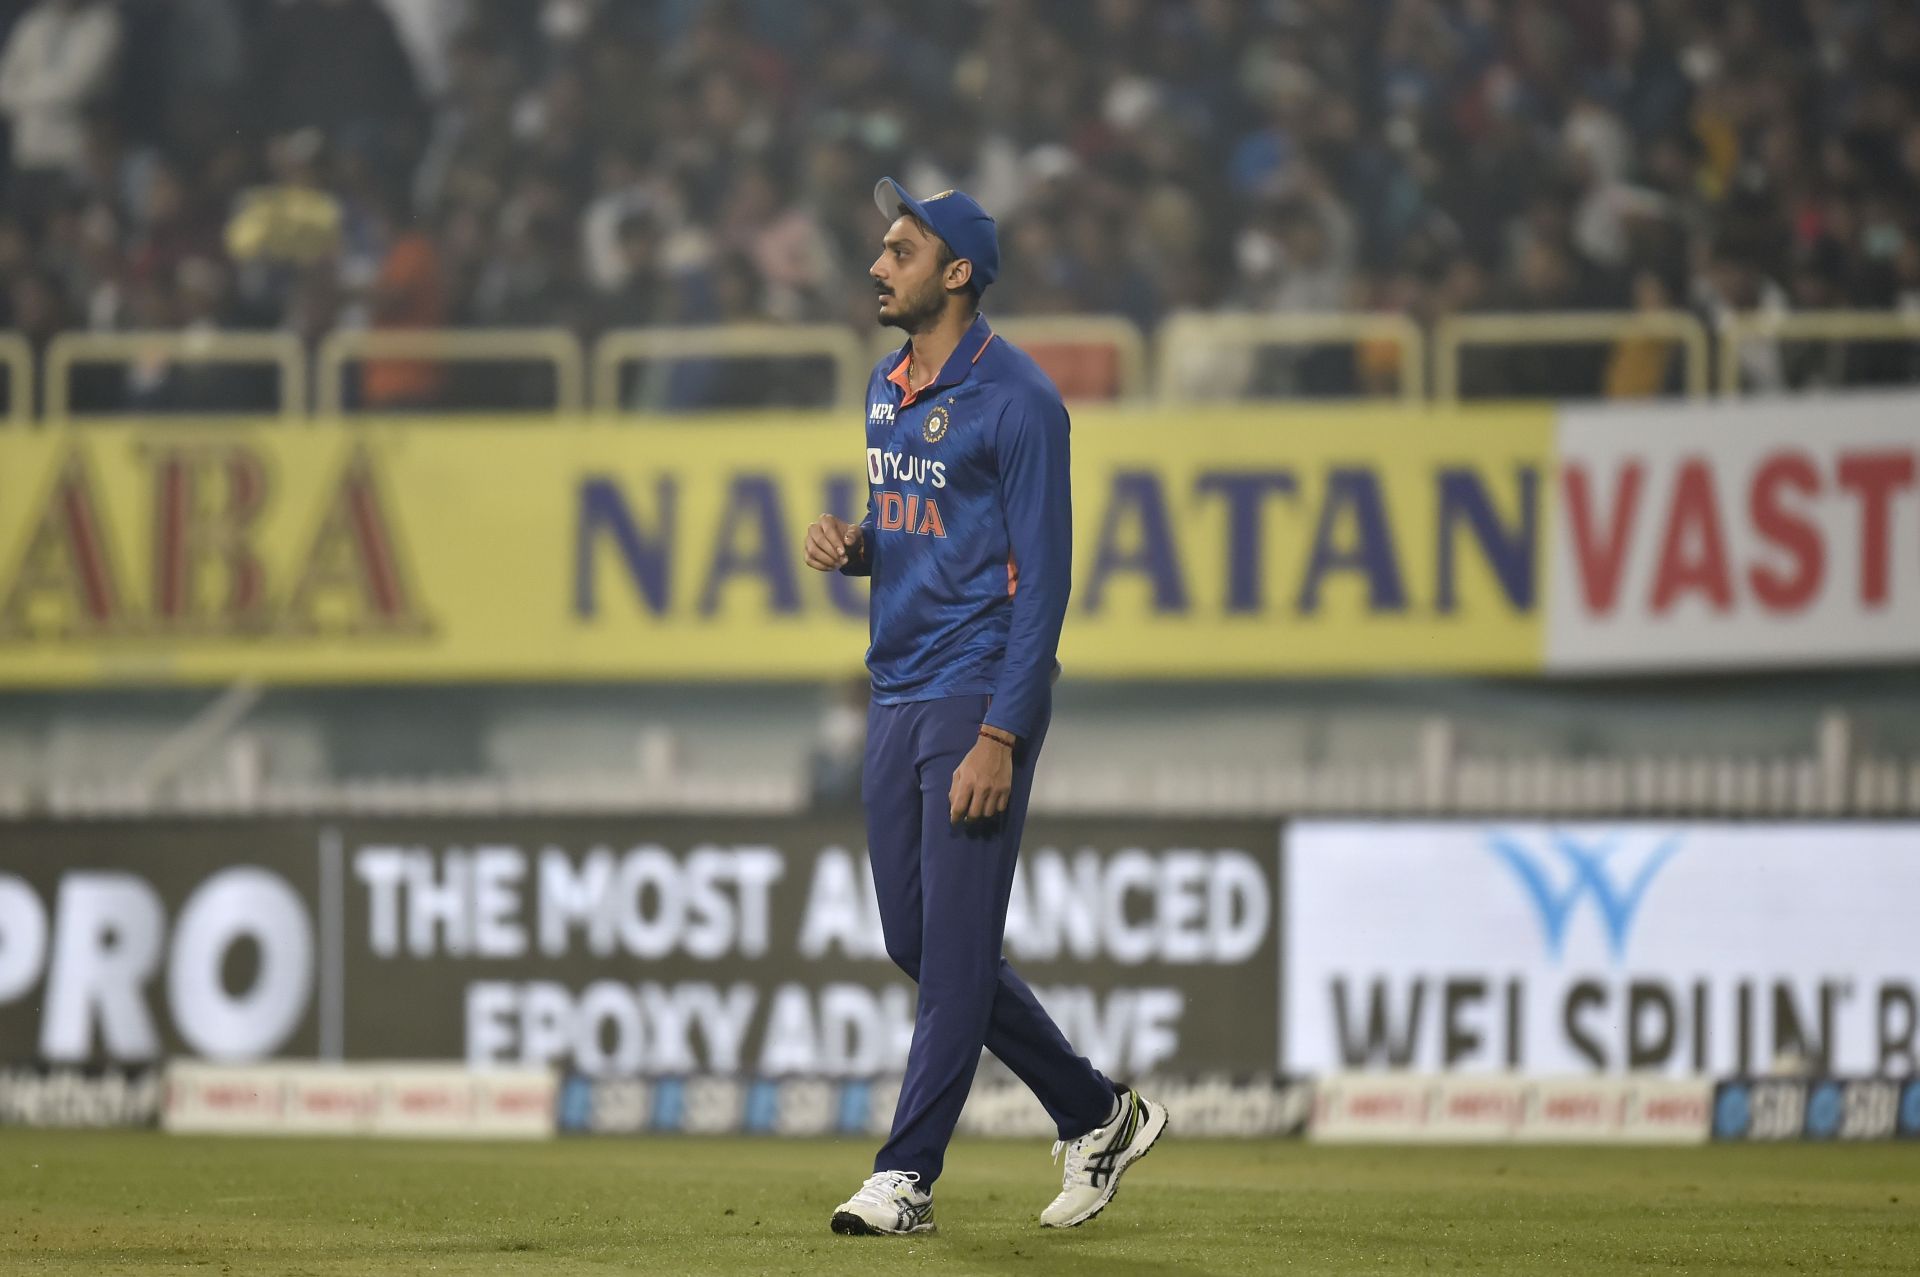 Axar Patel has done well in IPL and international cricket over the last few years (Image: Getty)